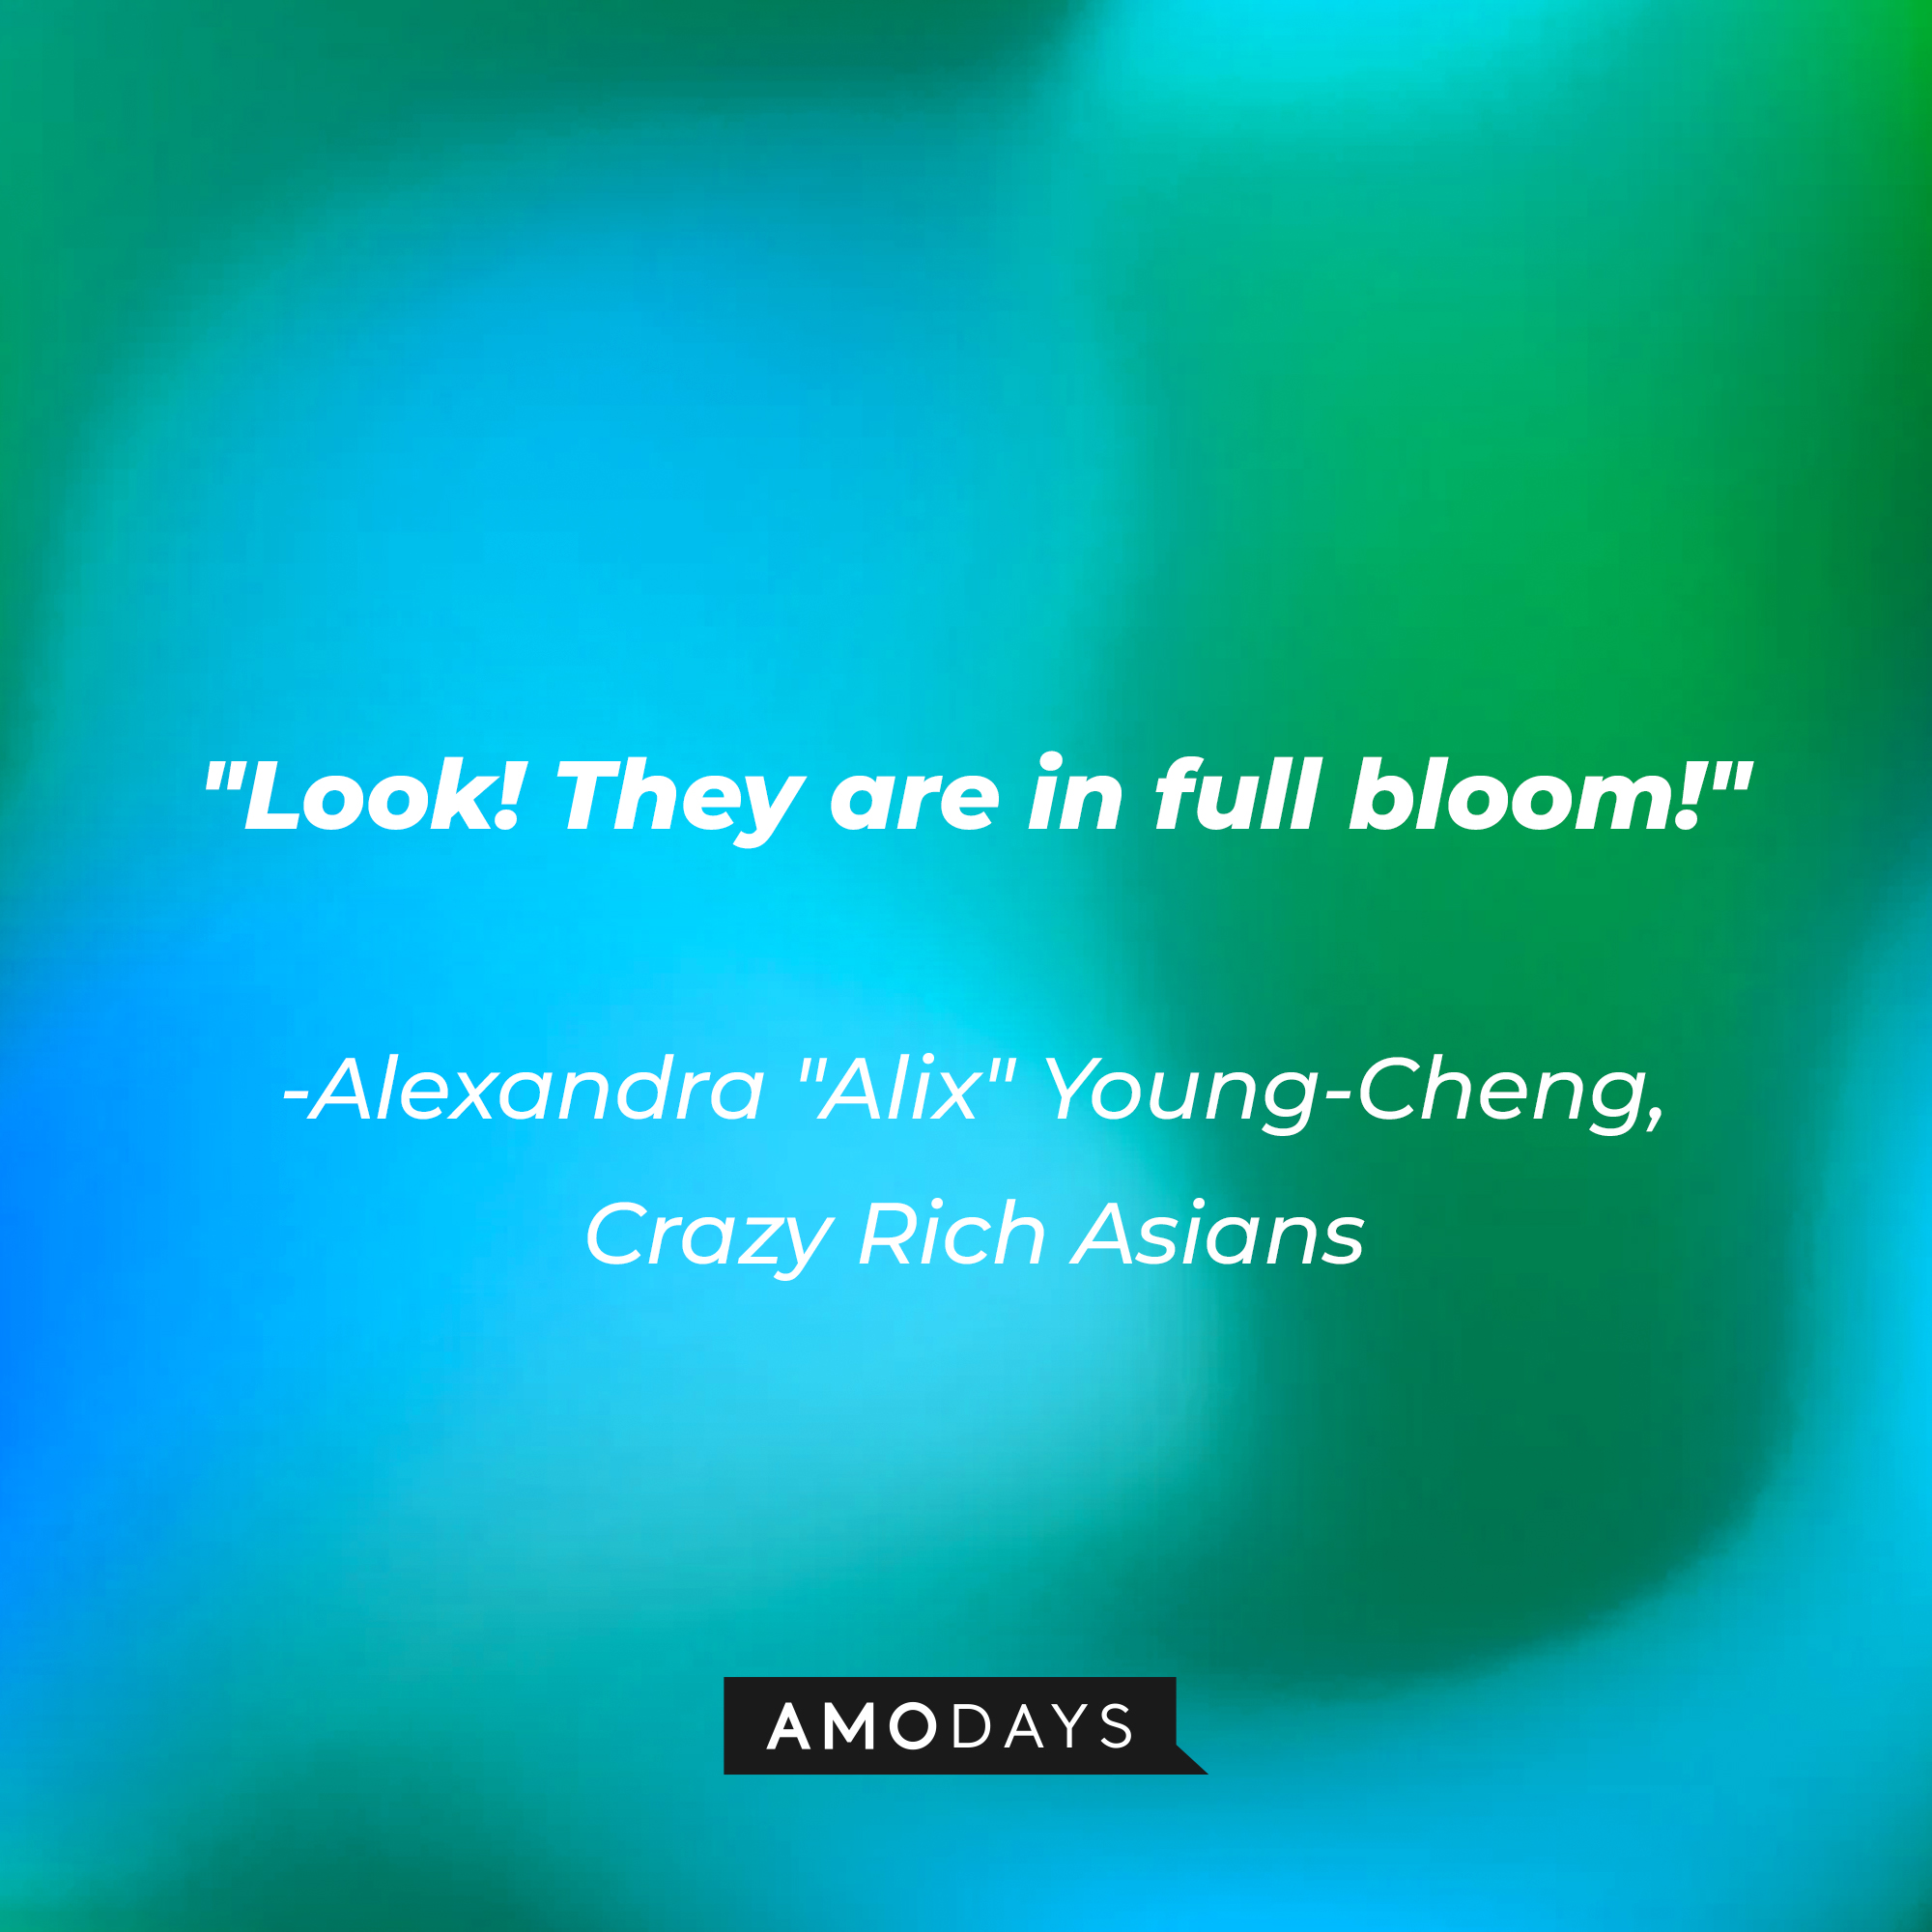 Amanda "Alix" Young Cheng's quote: "Look! They are in full bloom." | Source: AmoDays